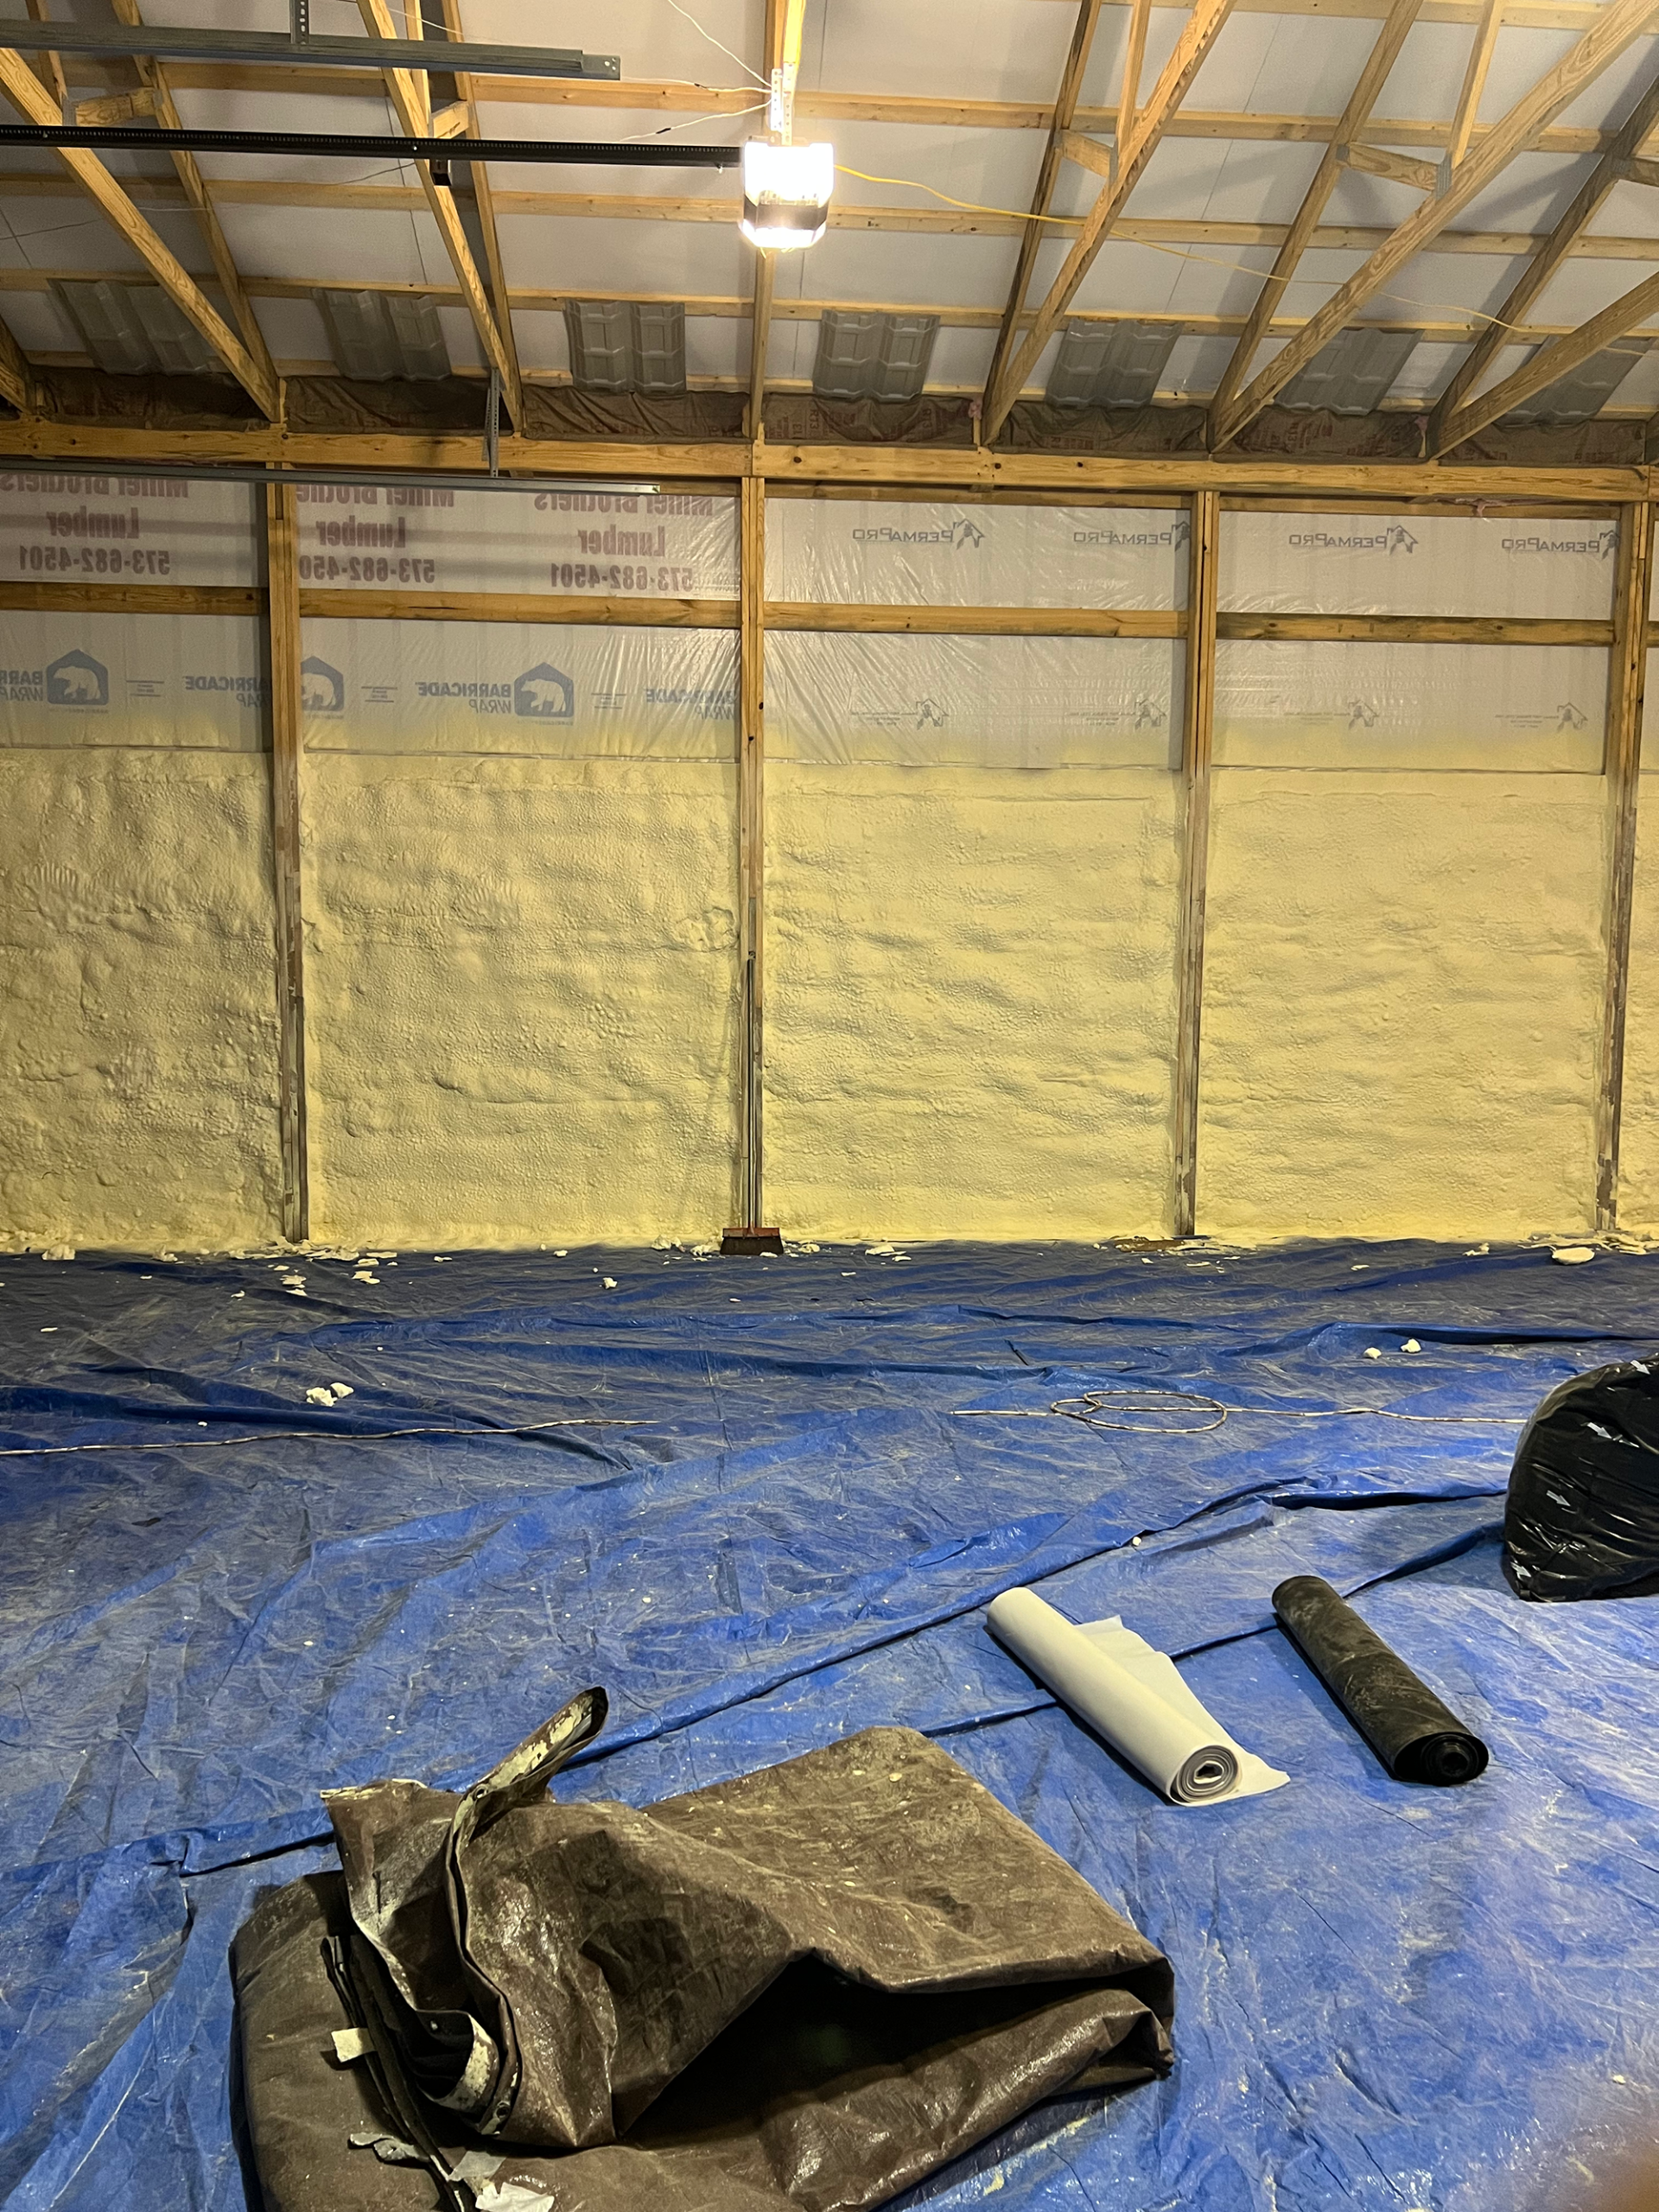 Get Started on Your Spray Foam Project in the Columbia, MO Area With DK Spray Foam & Insulation